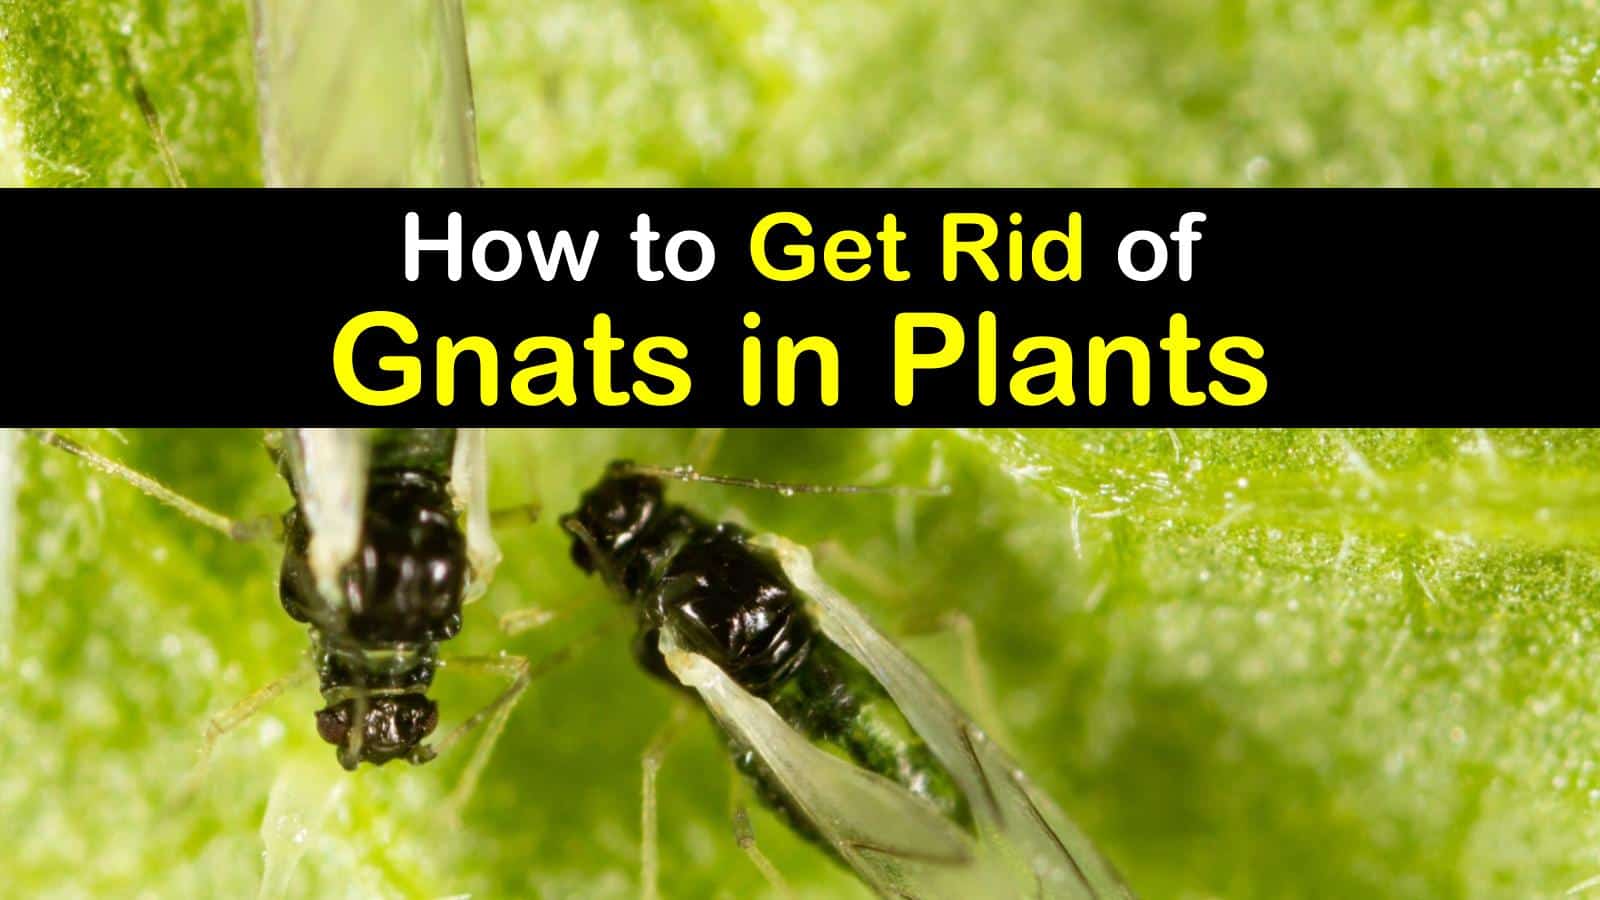 How to Get Rid of Gnats in Plants titleimg1